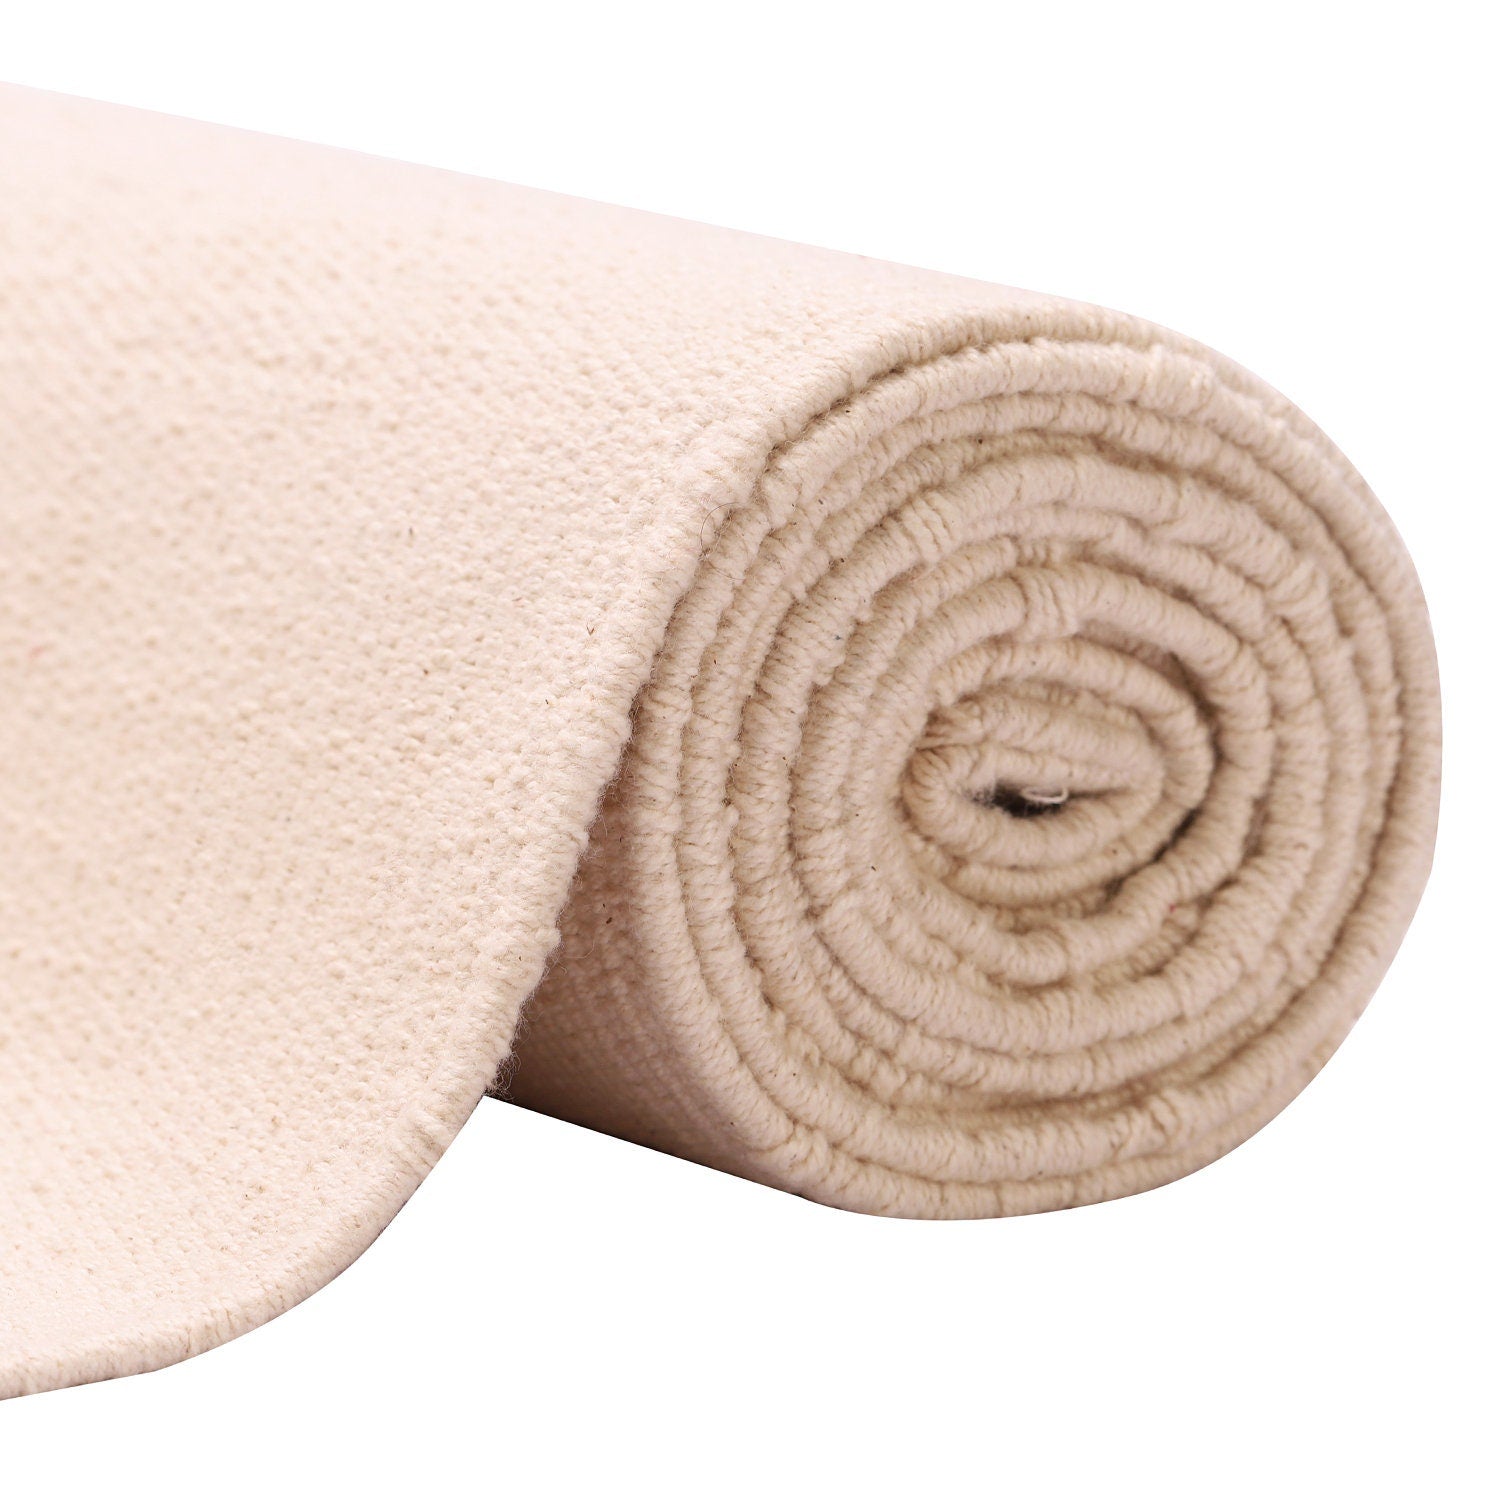 Organic Cotton Yoga Mat: Handcrafted for Eco-Friendly Practice